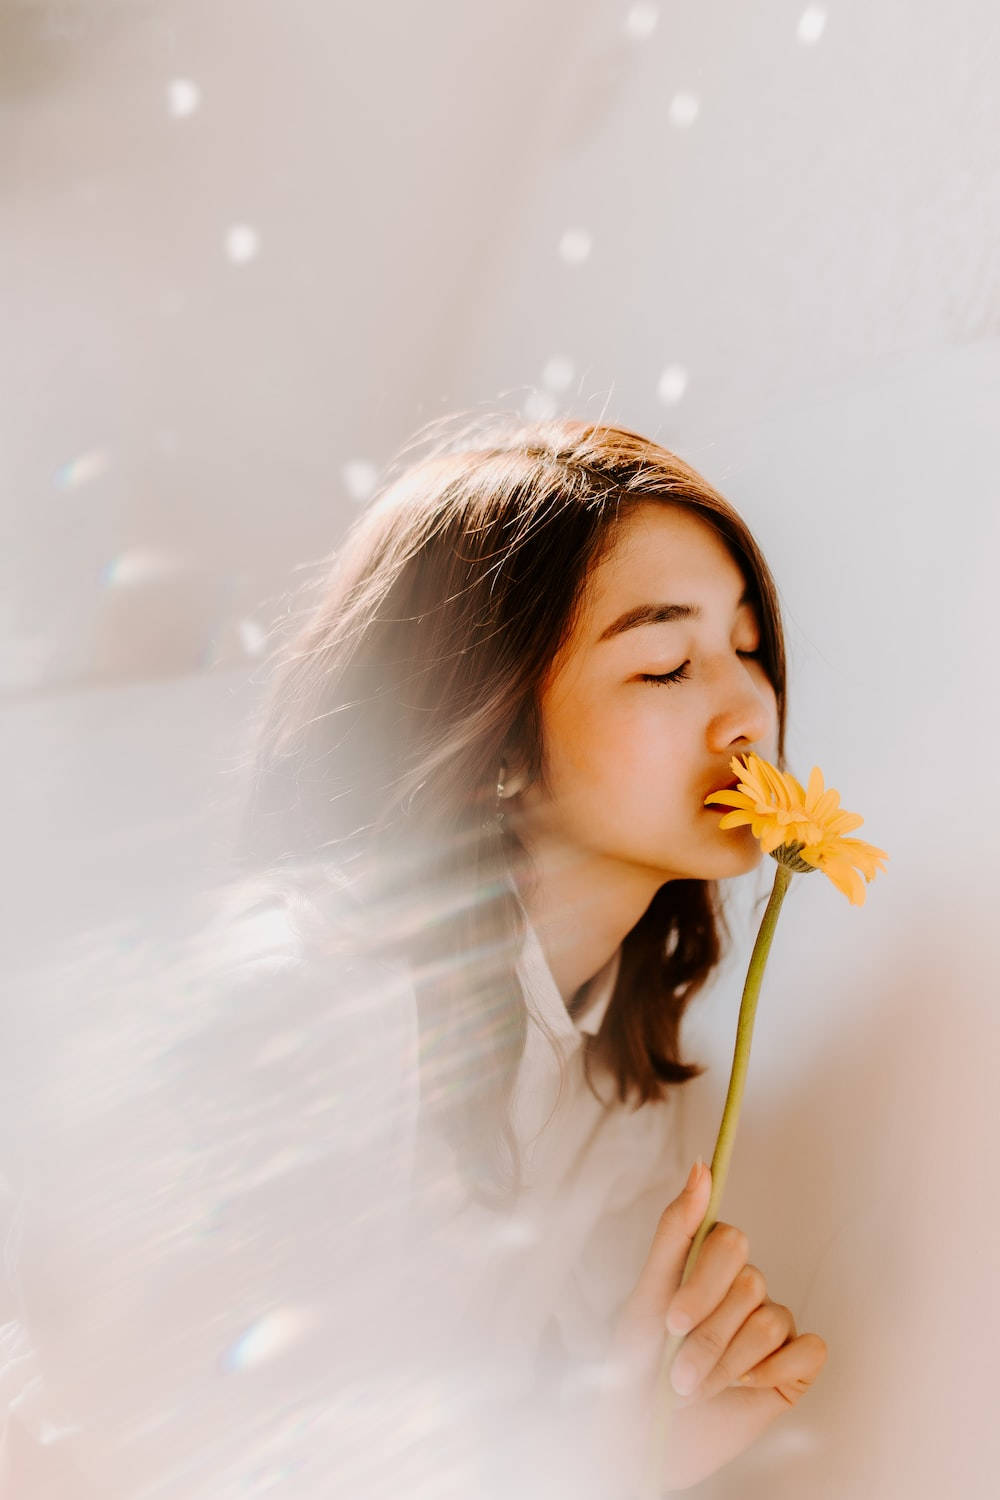 Lovely Girl Sniffing A Yellow Flower Wallpaper